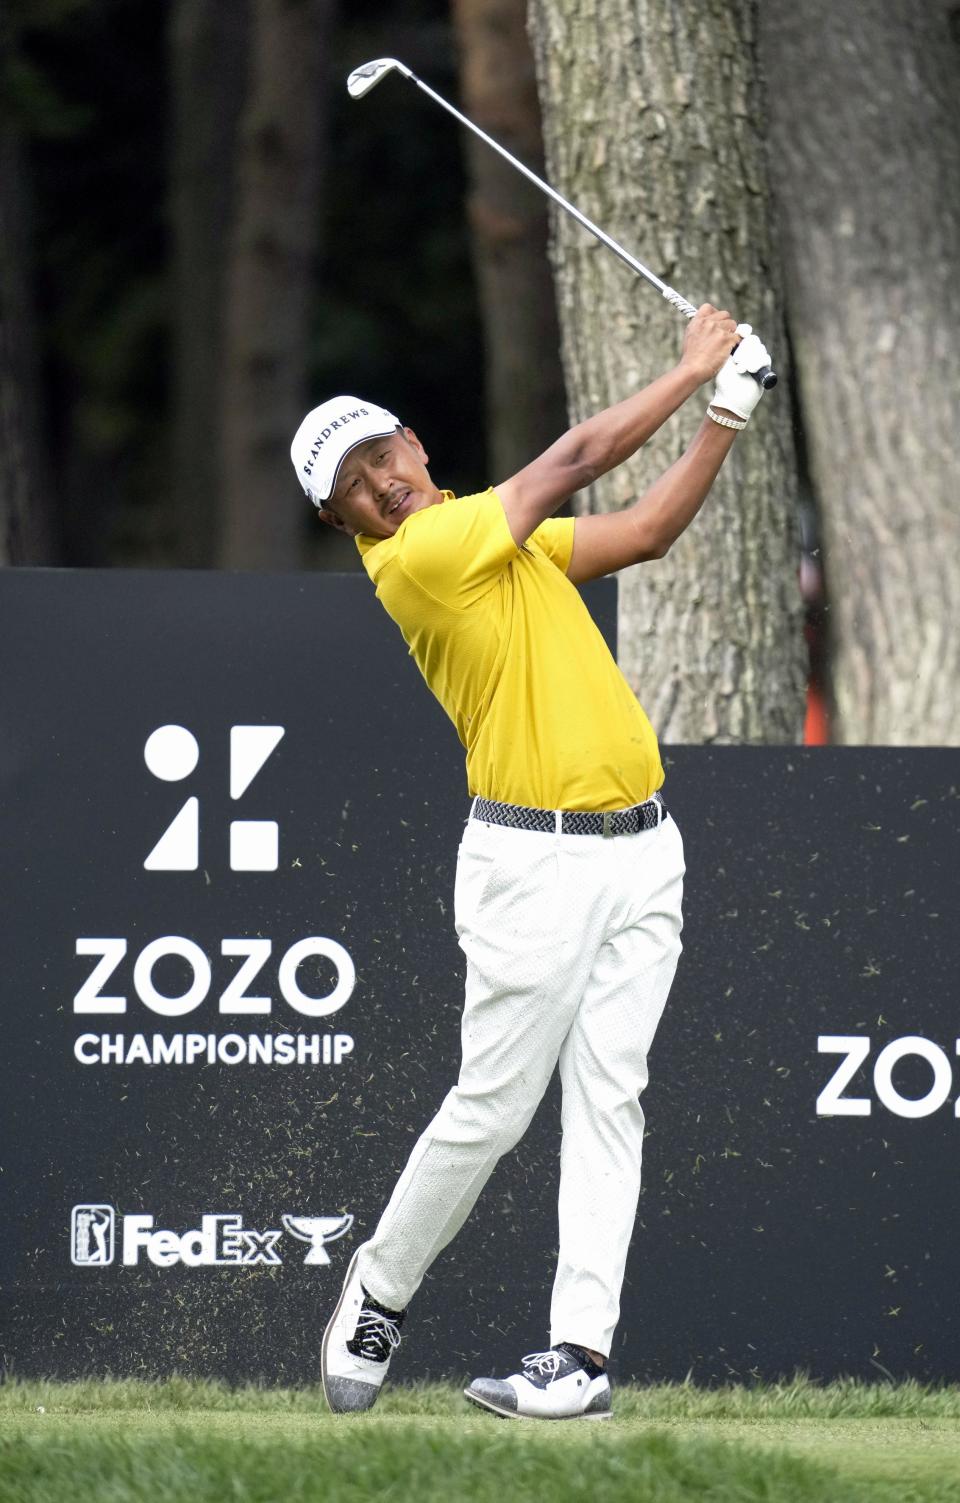 Japanese golfer Hiroshi Iwata plays a shot to take the first-round lead at the PGA Tour’s Zozo Championship on Narashino Country Club course in Chiba, east of Tokyo, Thursday, Oct, 21, 2021. (Kyodo News via AP)